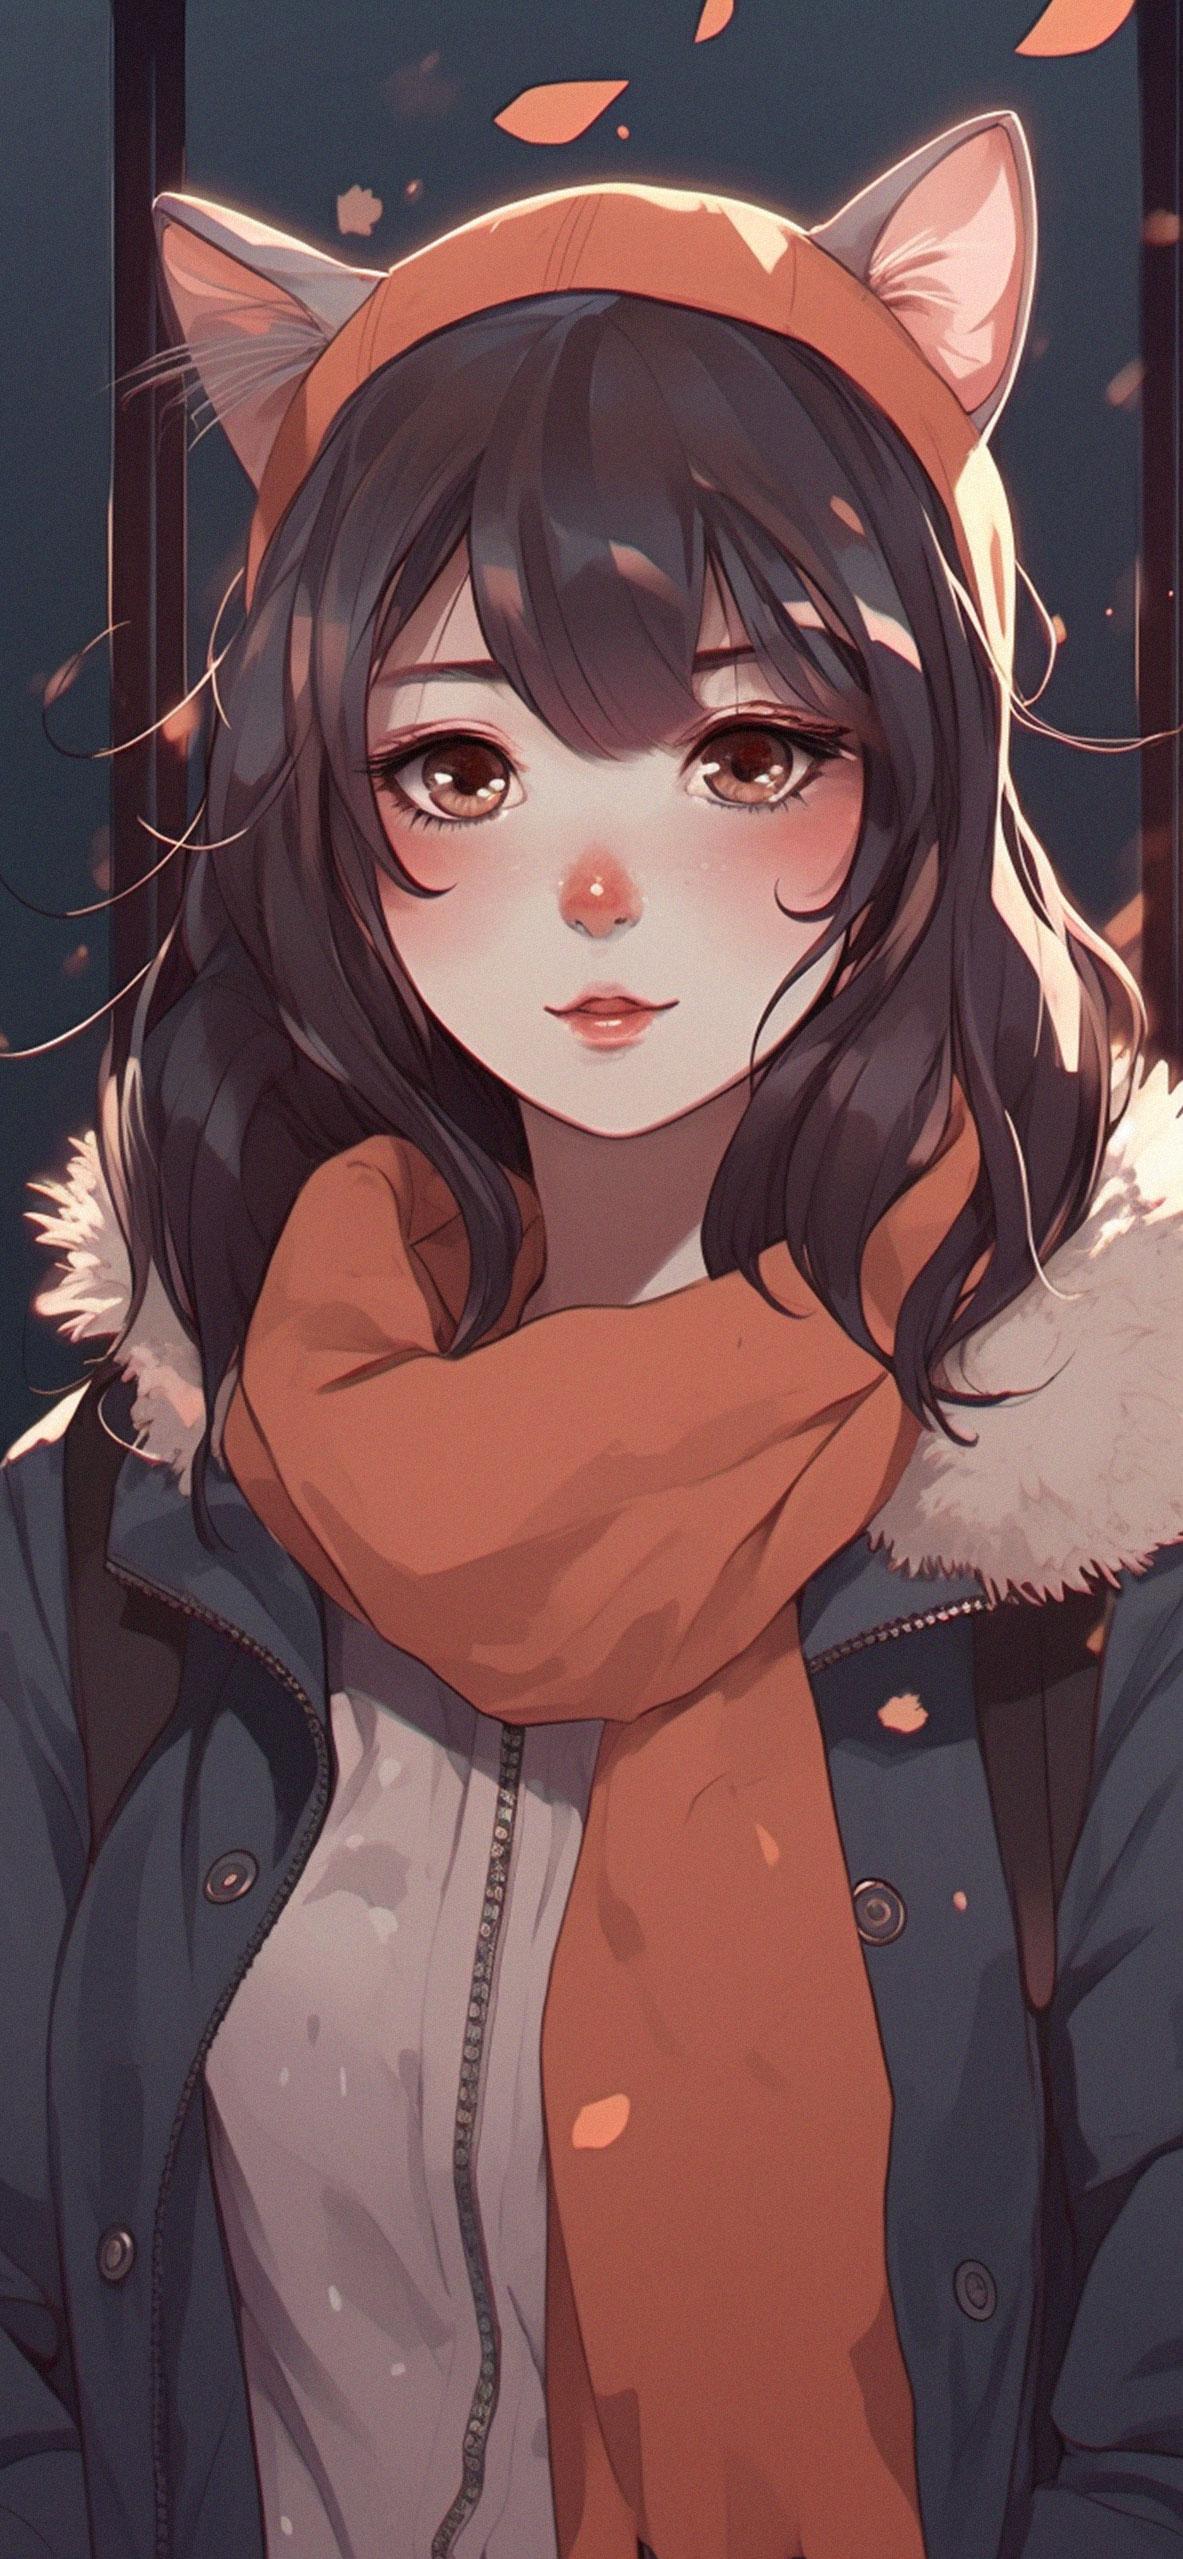 Cute Anime Girl With Cat Ears Wallpaper